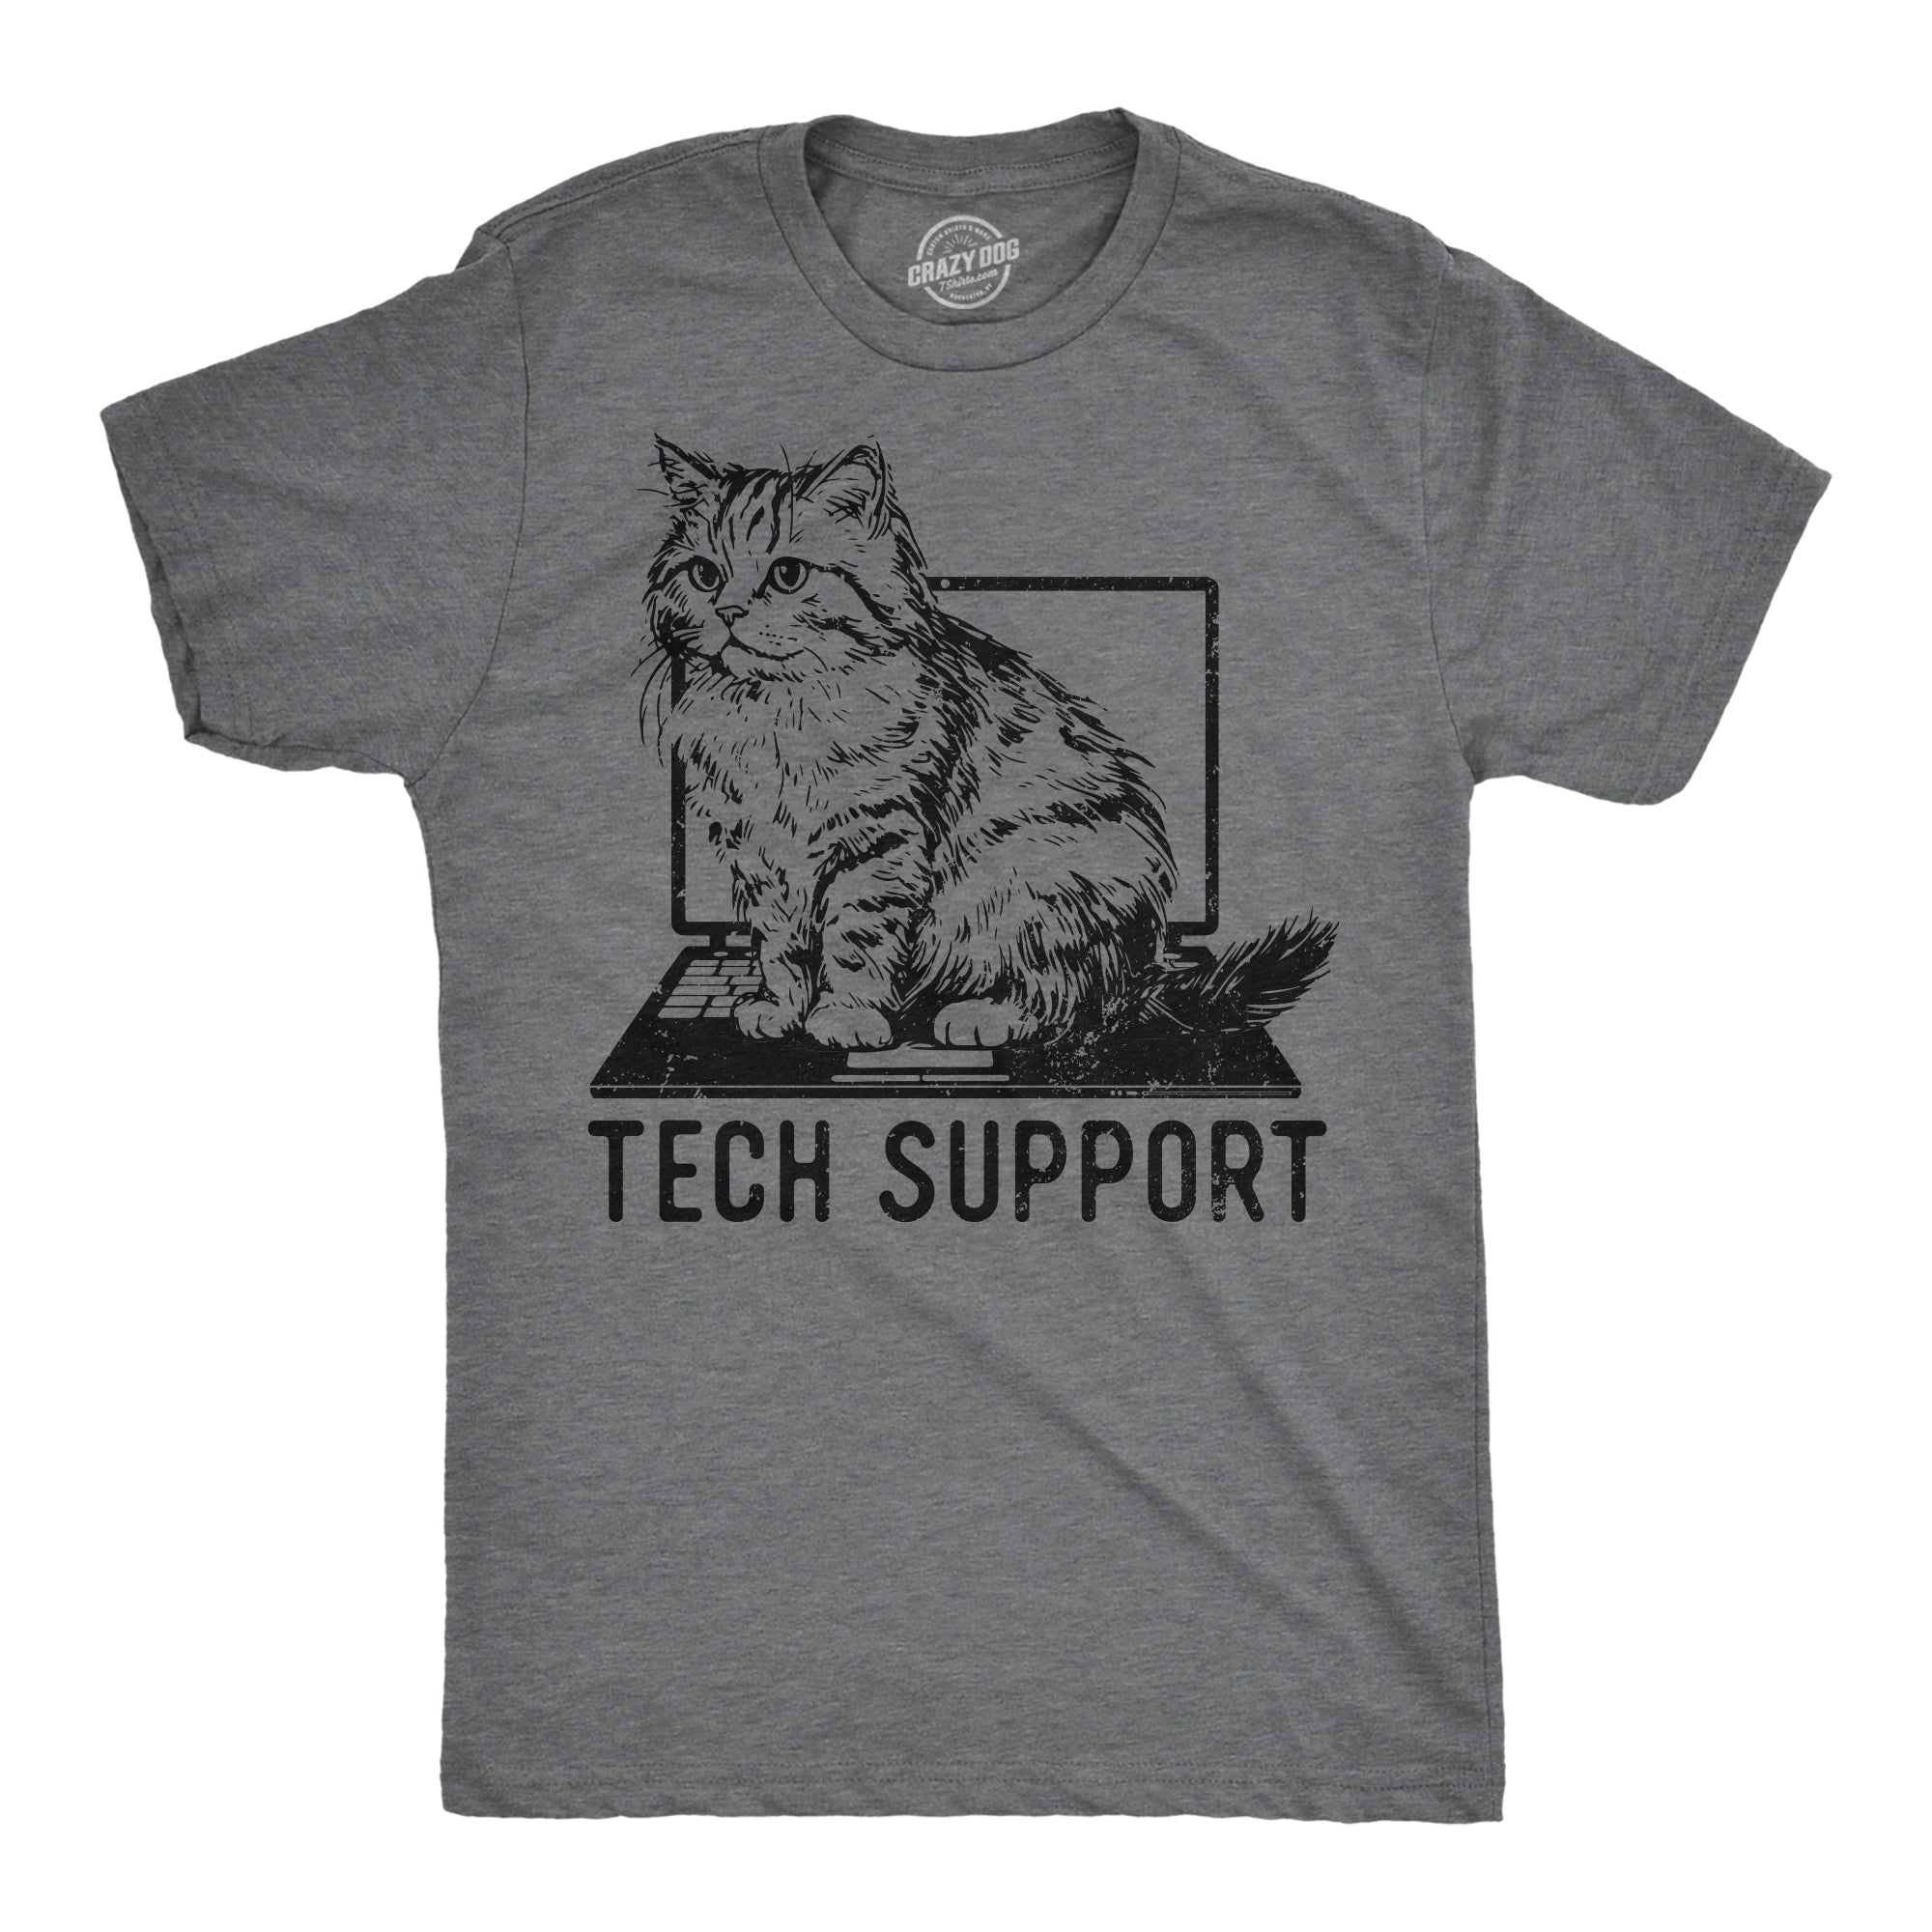 Funny Dark Heather Grey - Tech Support Tech Support Mens T Shirt Nerdy cat sarcastic Tee